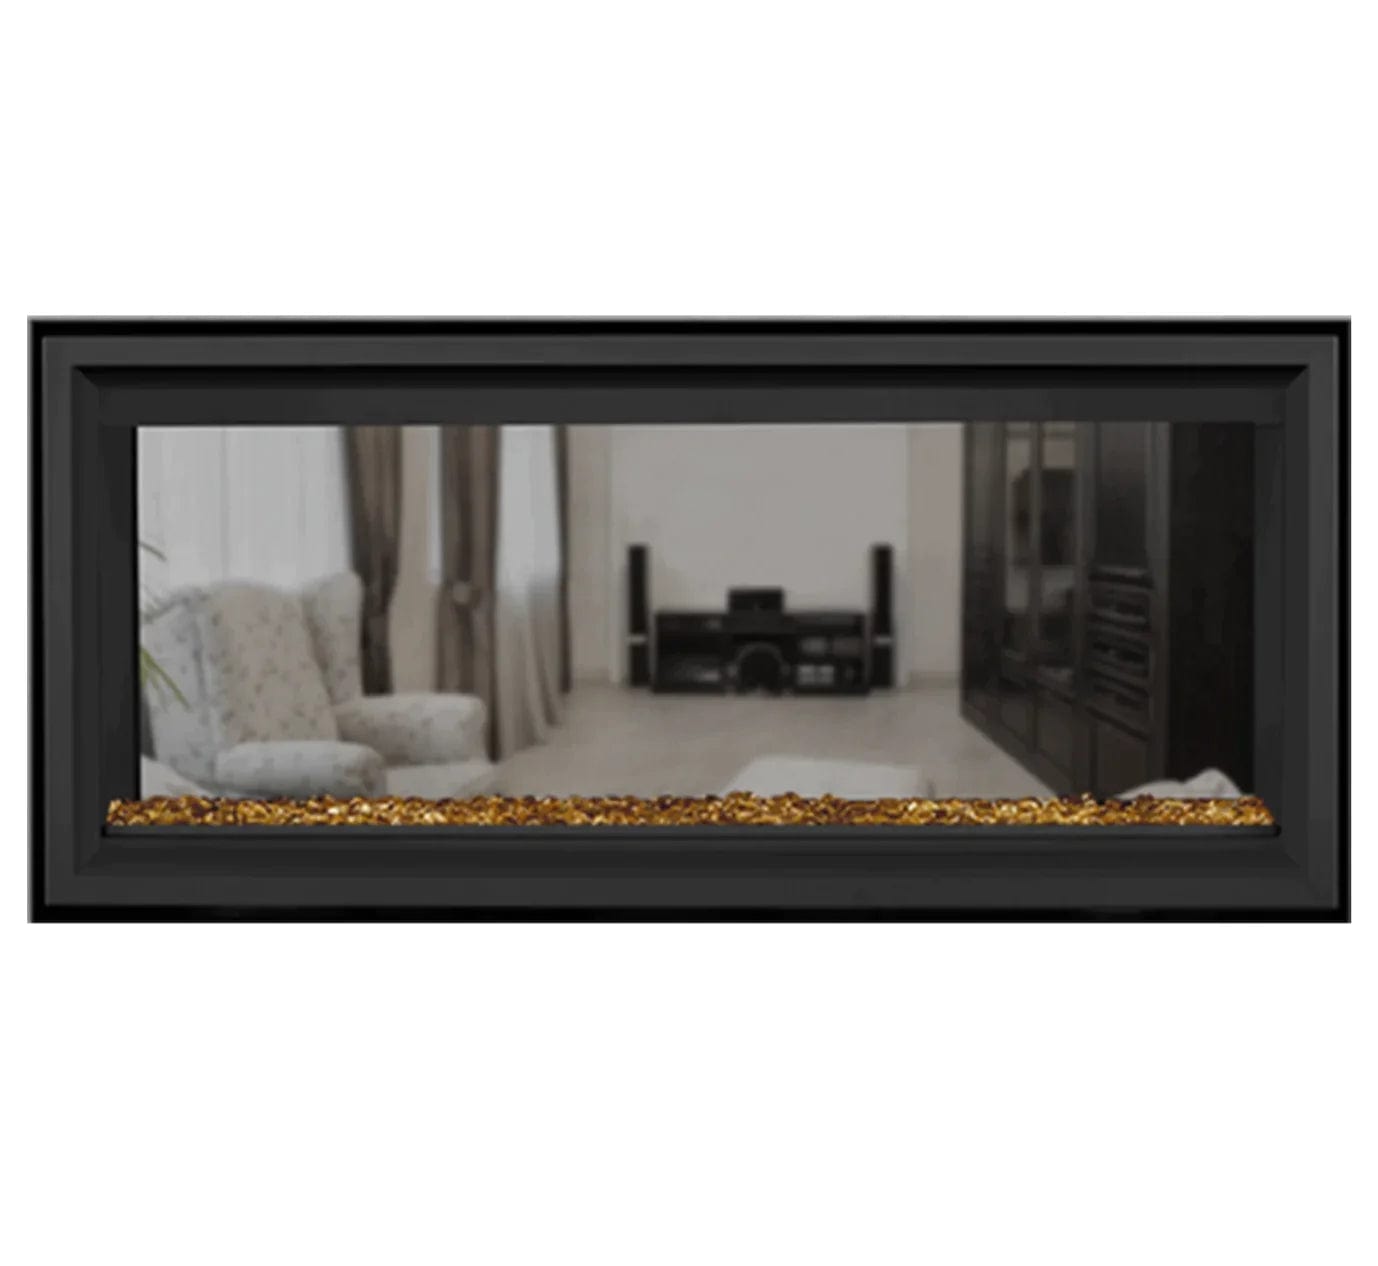 Napoleon LV38N2-1 Vector See-Through Direct Vent Linear Gas Fireplace, 38-Inch, Electronic Ignition, Natural Gas